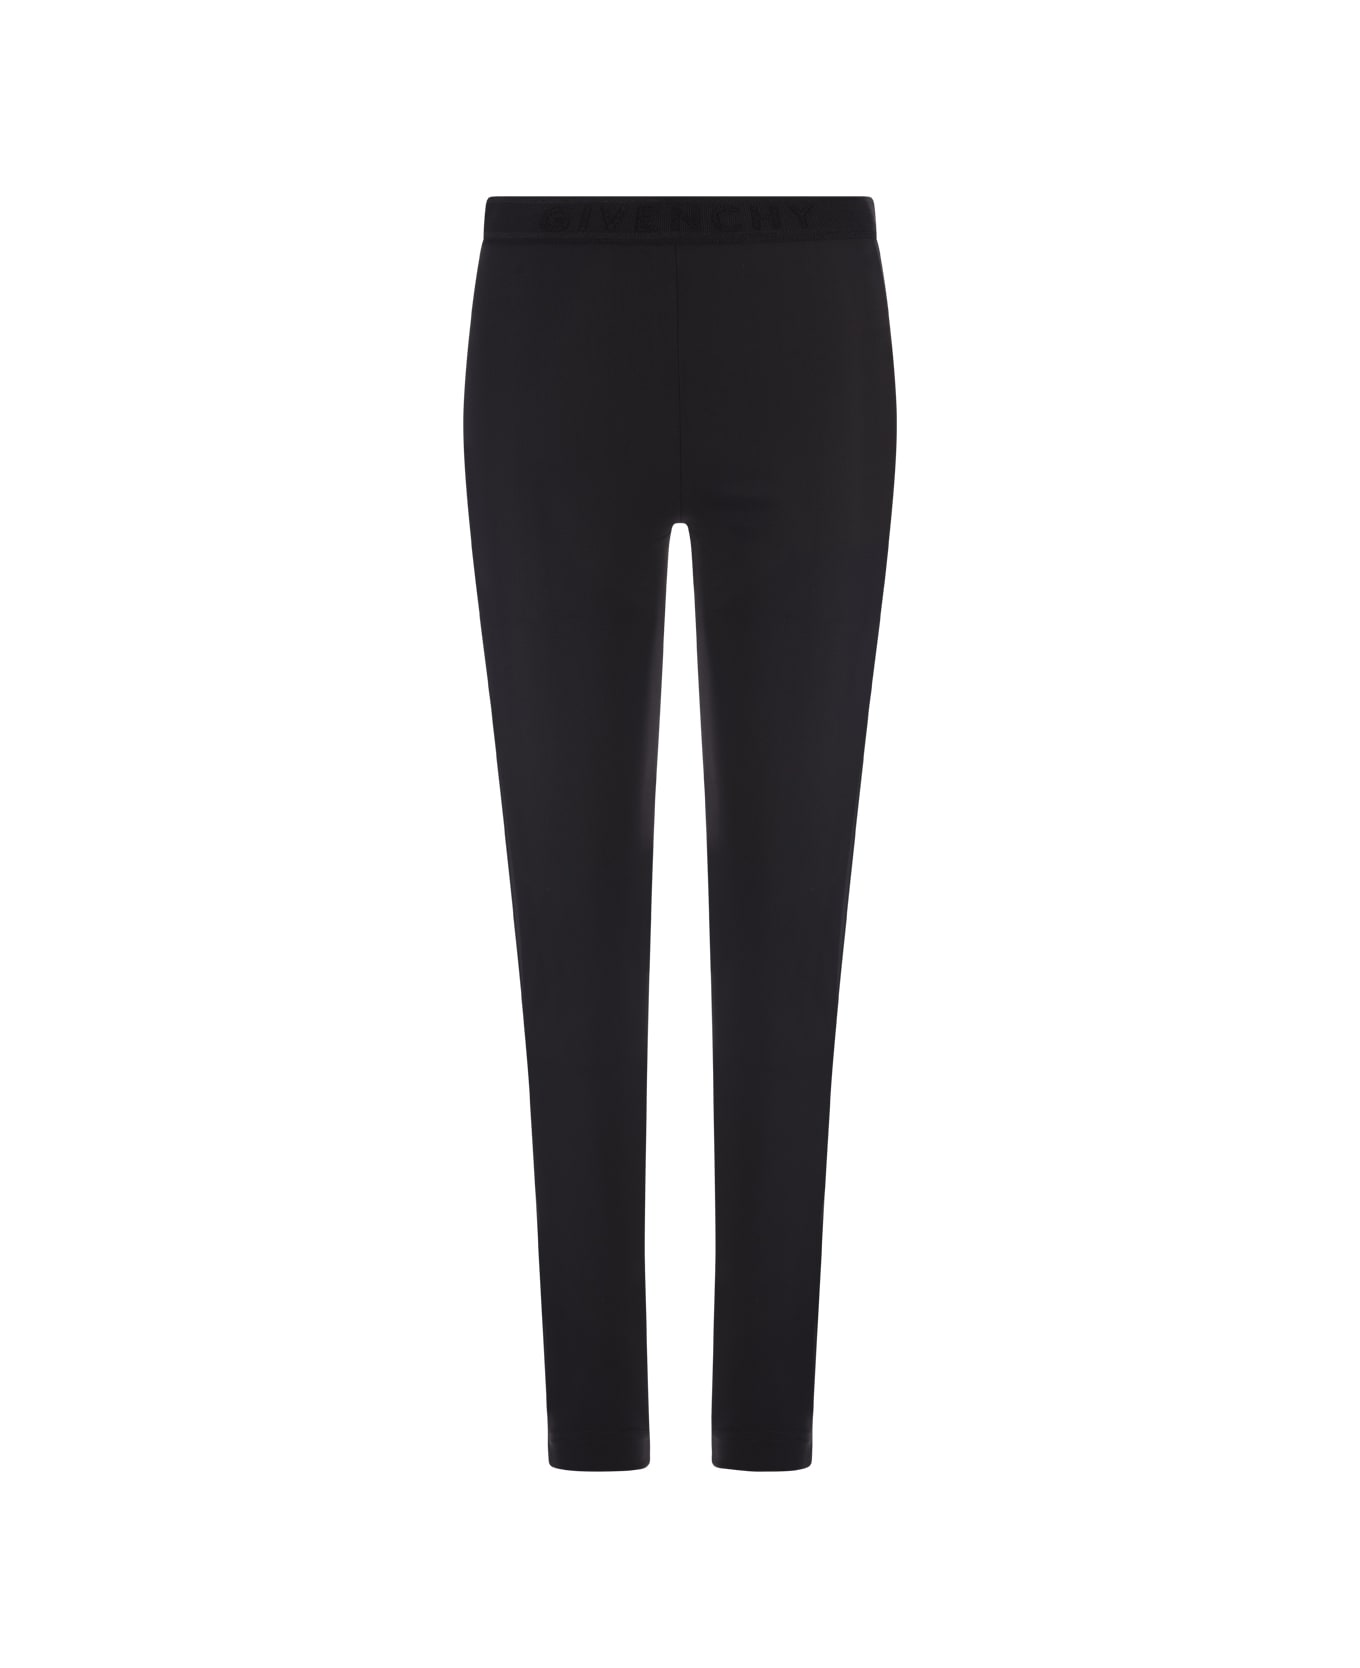 Givenchy Black Jersey Leggings With Givenchy Belt - Black レギンス